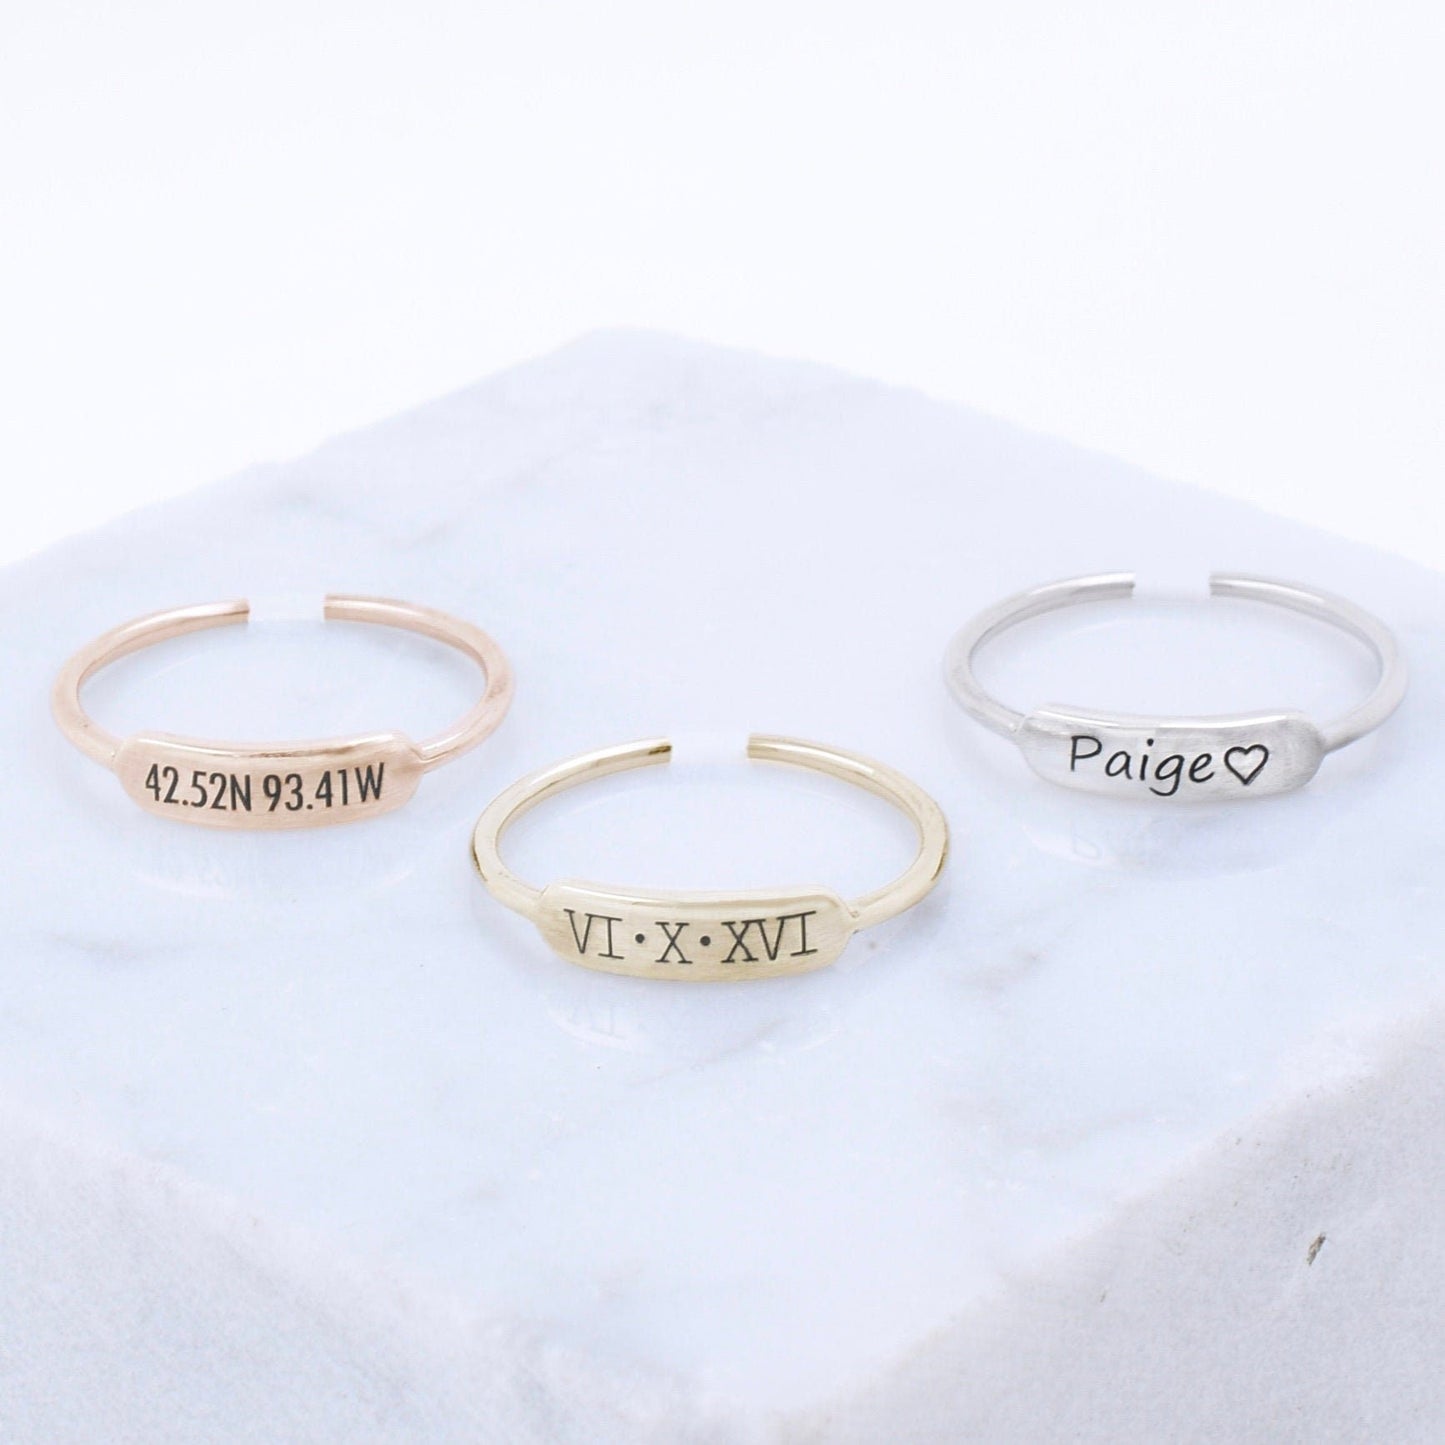 Personalized Toe Ring - Custom Engraving